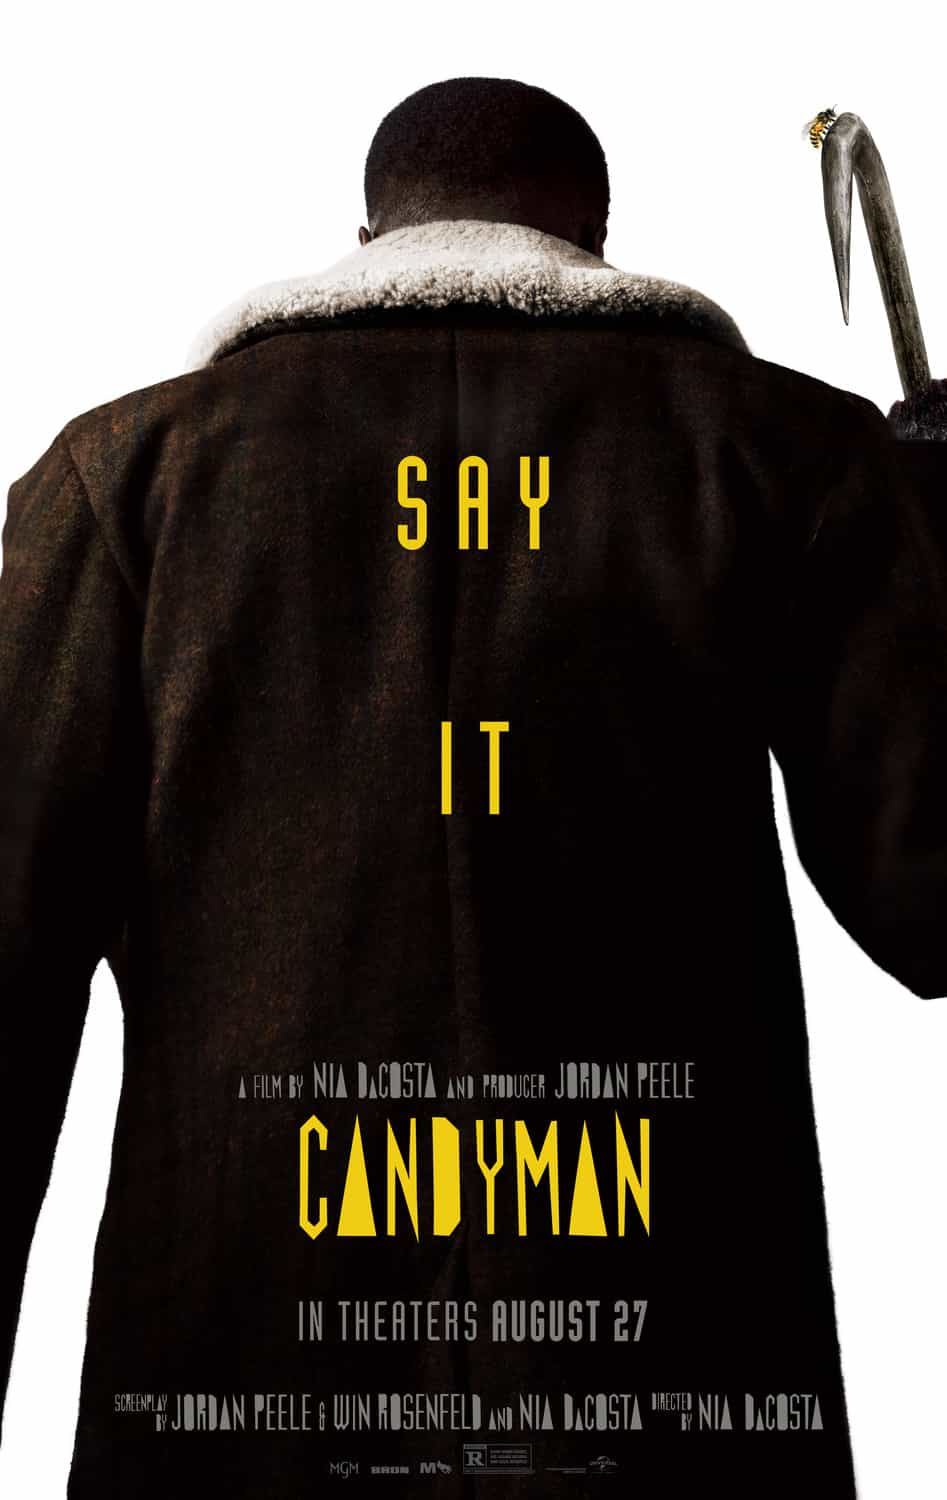 Candyman remake written and produced by Jordan Peele get its first trailer